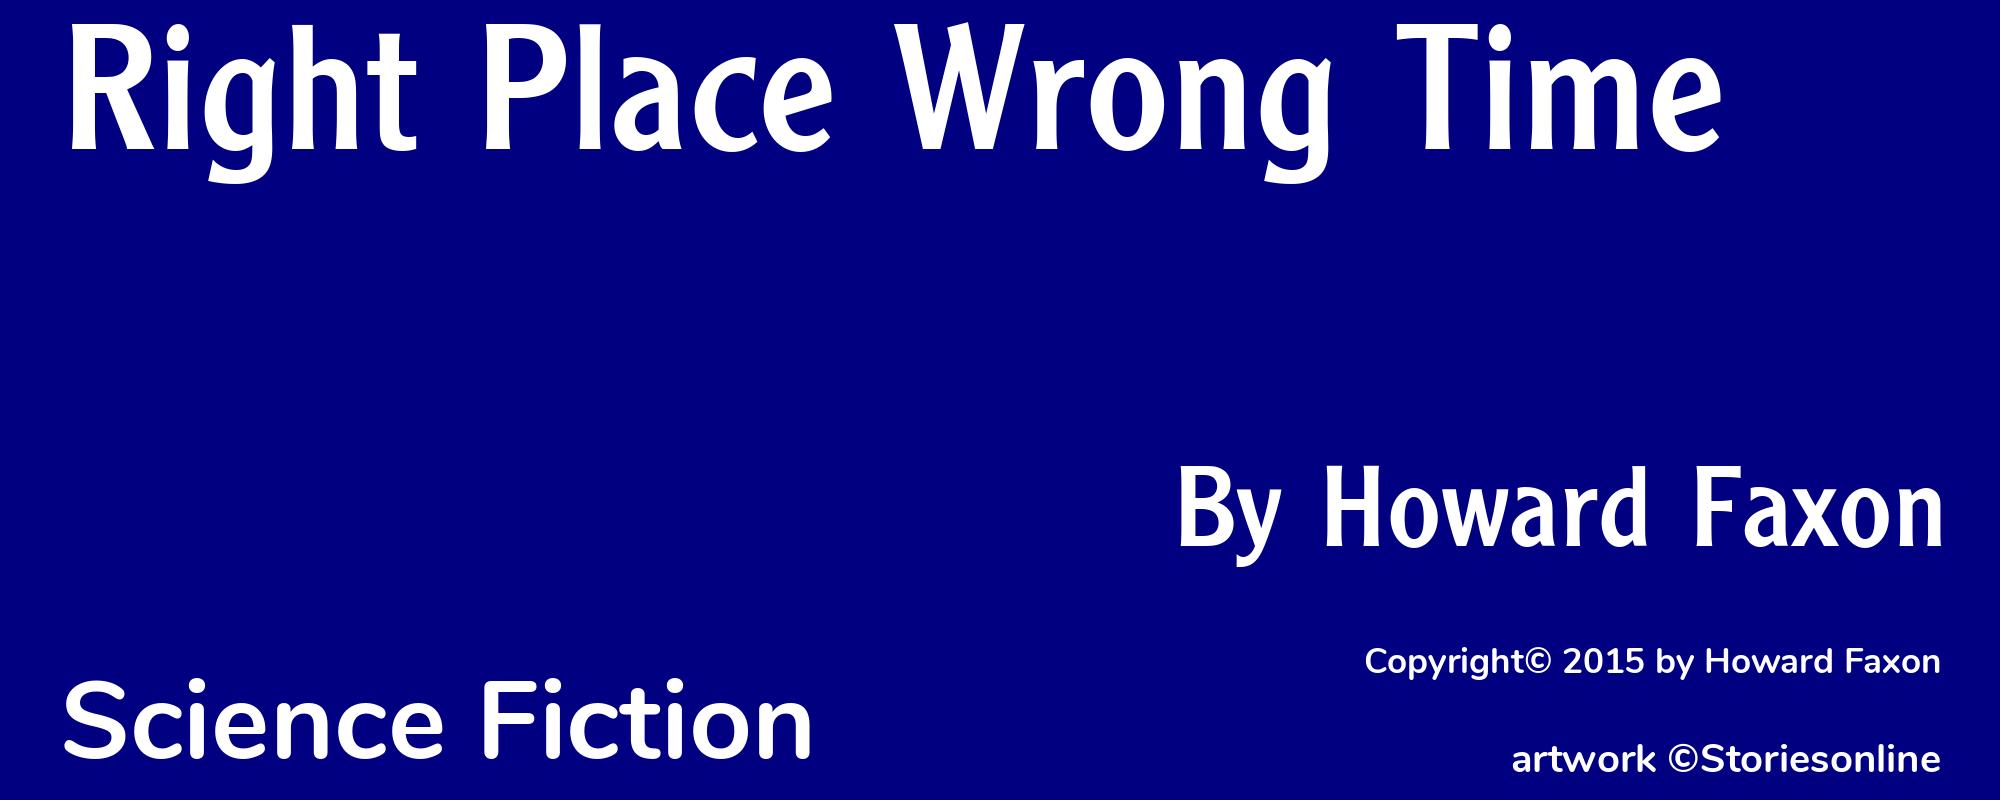 Right Place Wrong Time - Cover